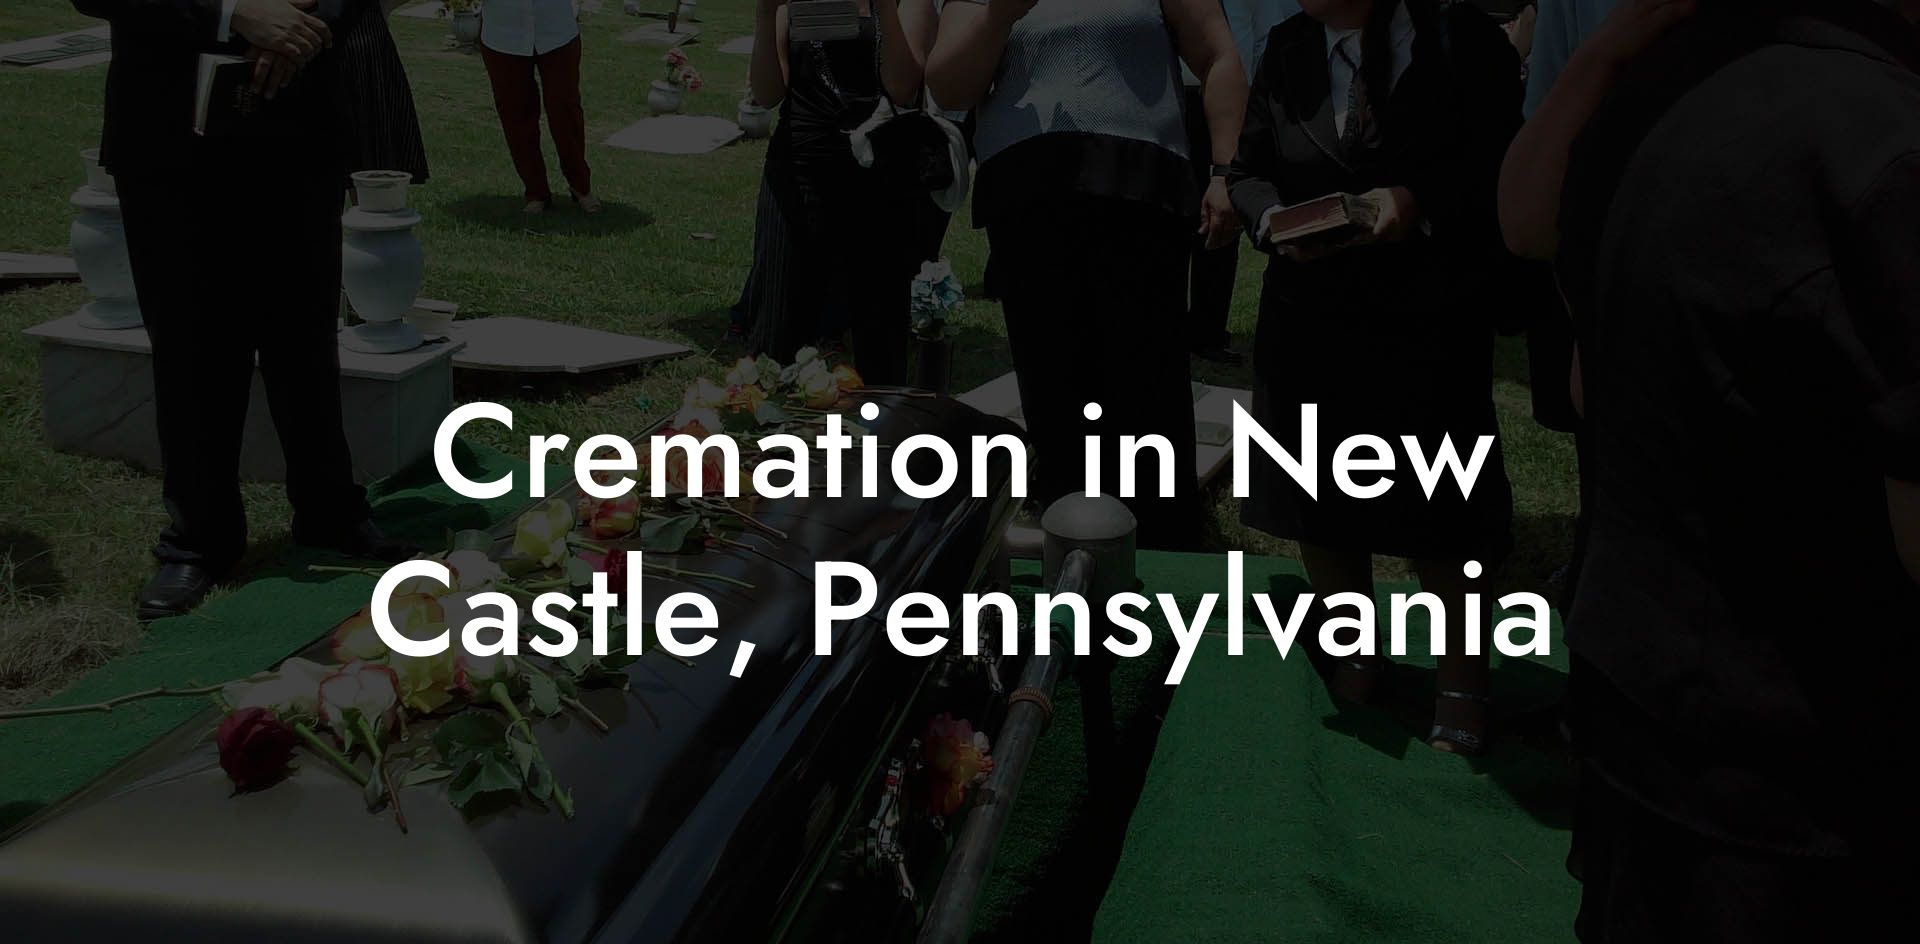 Cremation in New Castle, Pennsylvania